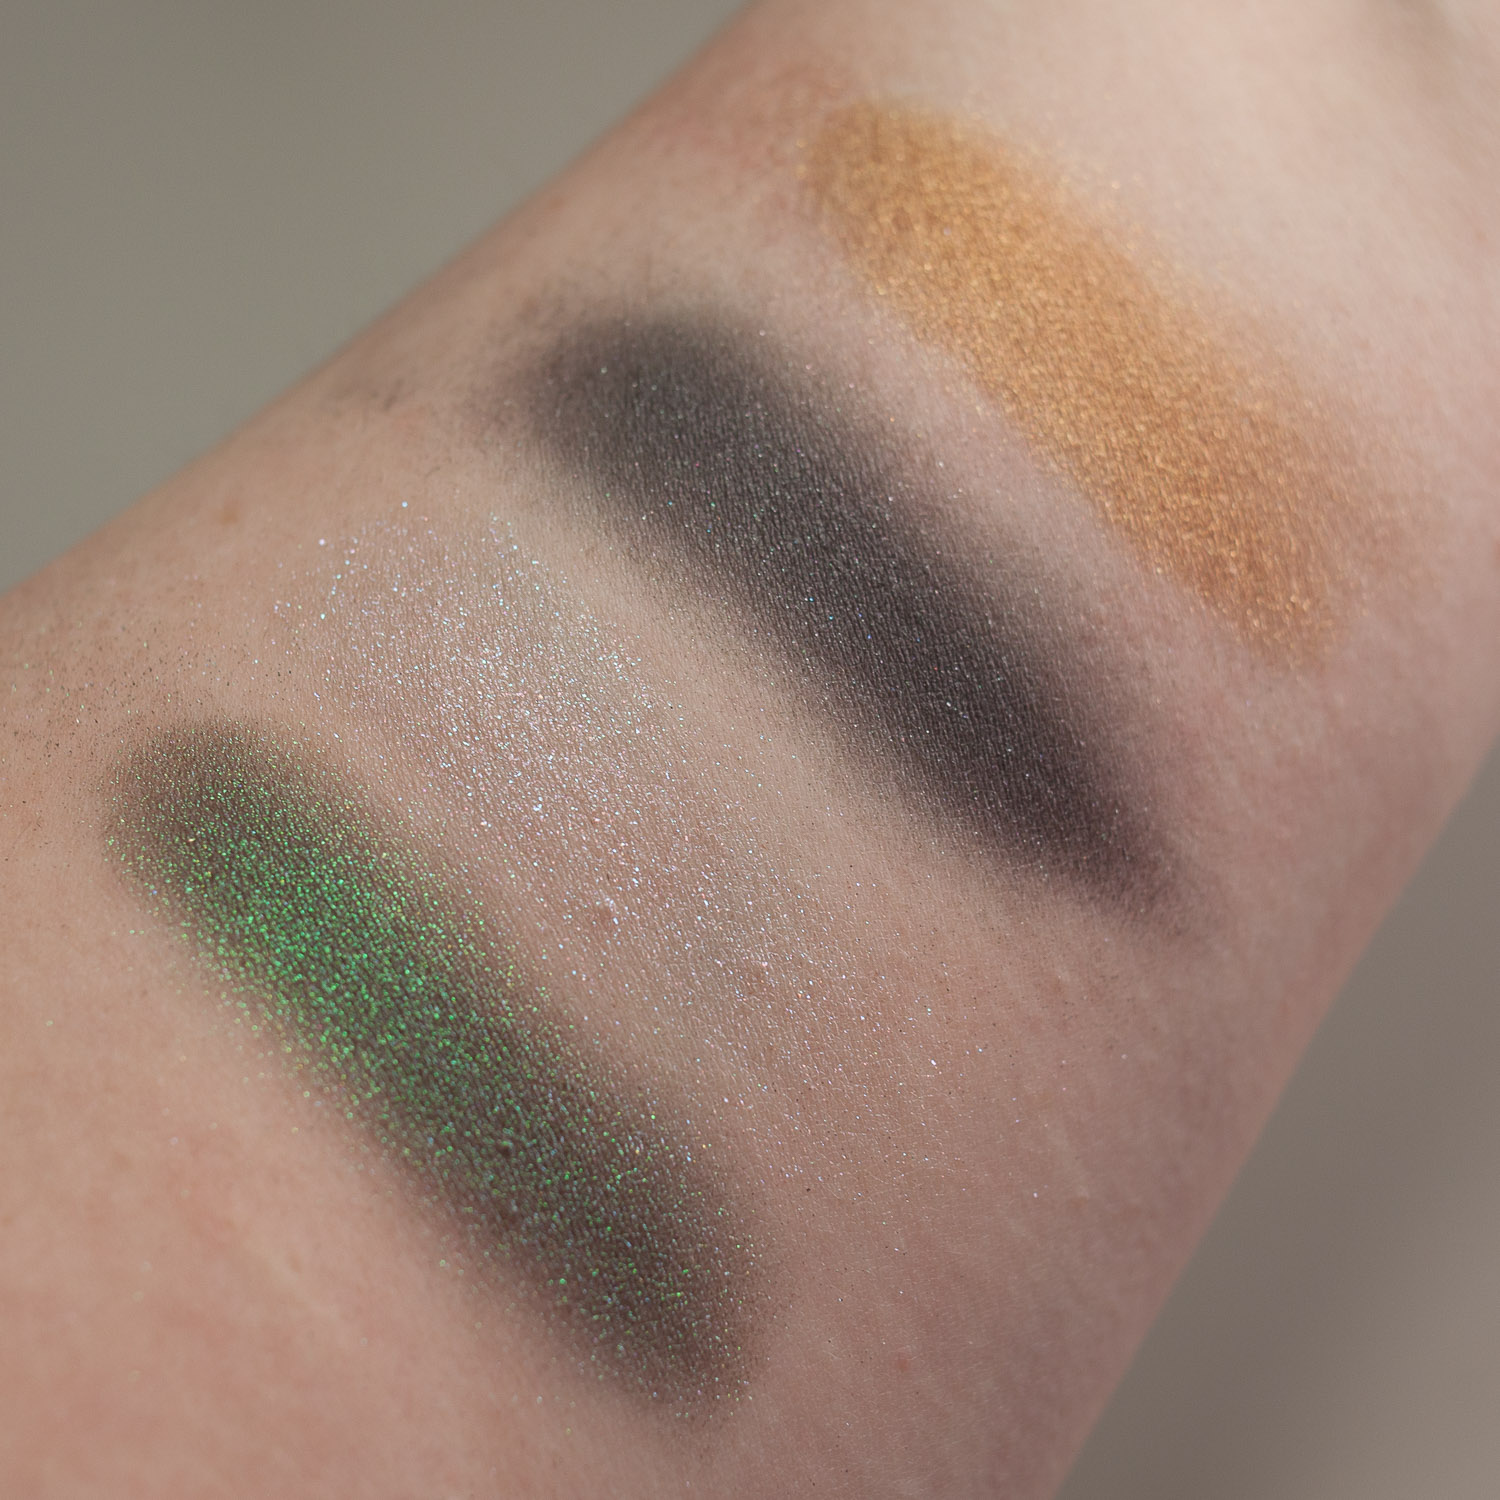 LH COSMETICS Enchanted Mysteries Eyeshadow Palette Quad Multichrome - Swatches blended Shimmer